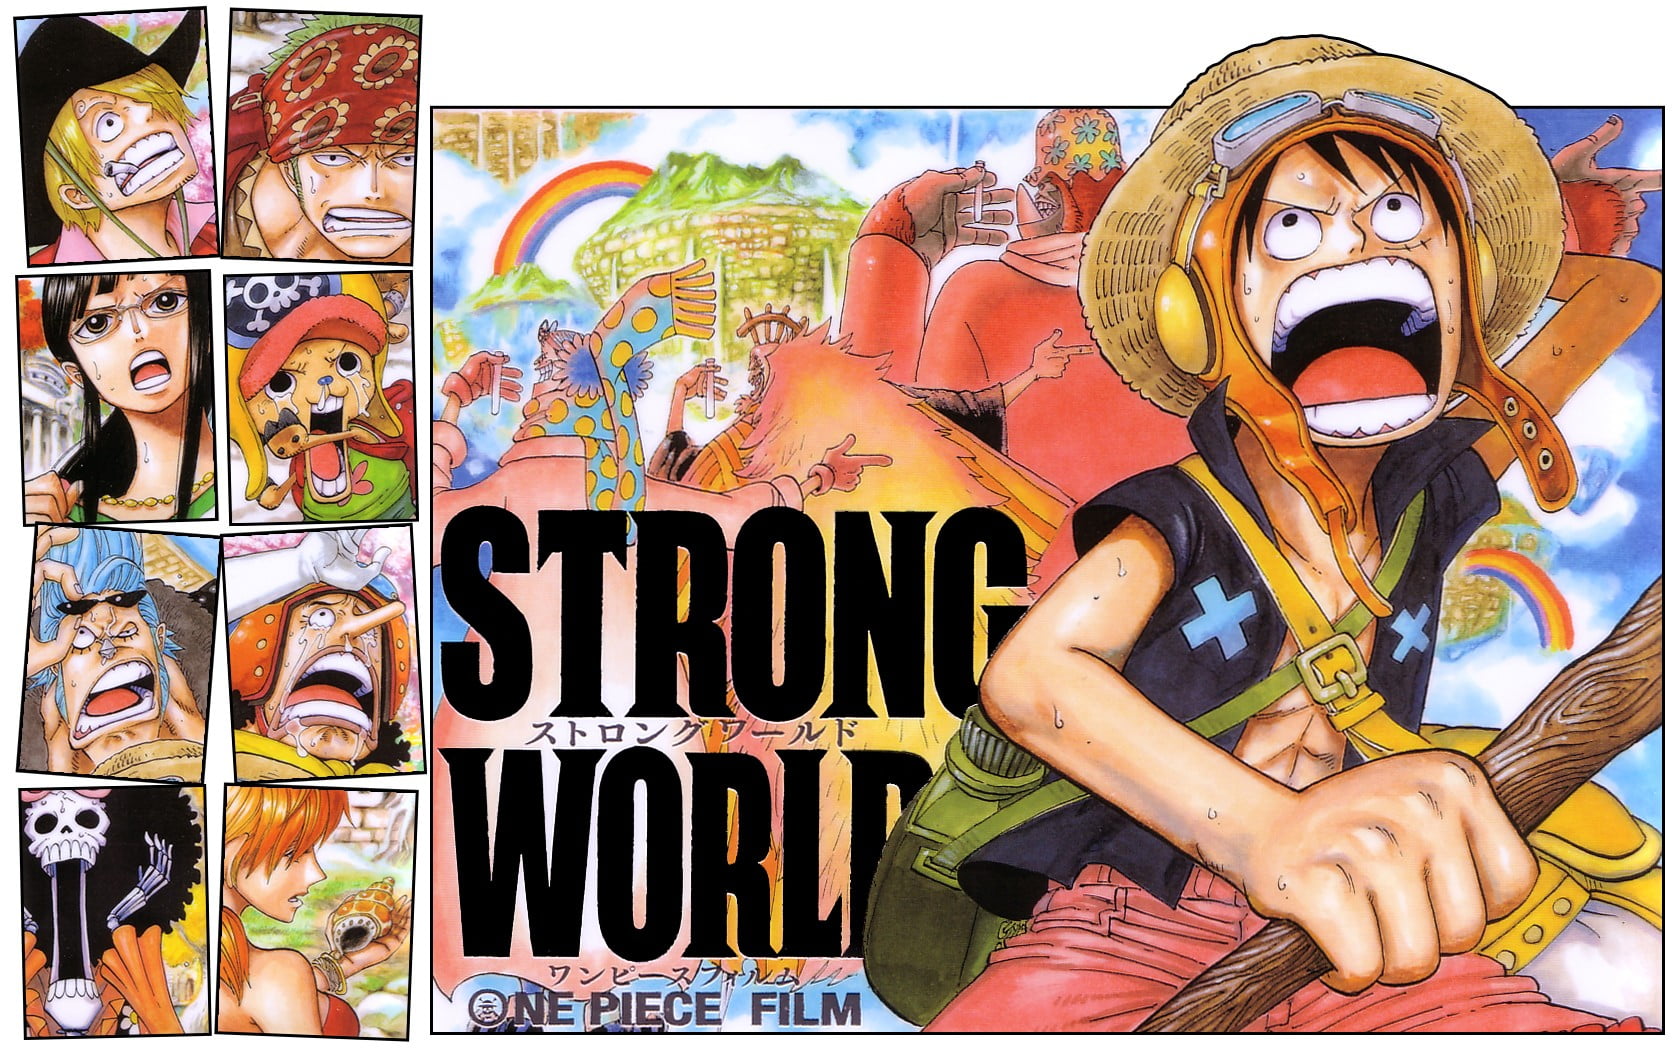 Strong World one piece poster, One Piece, anime, Monkey D. Luffy, Sanji